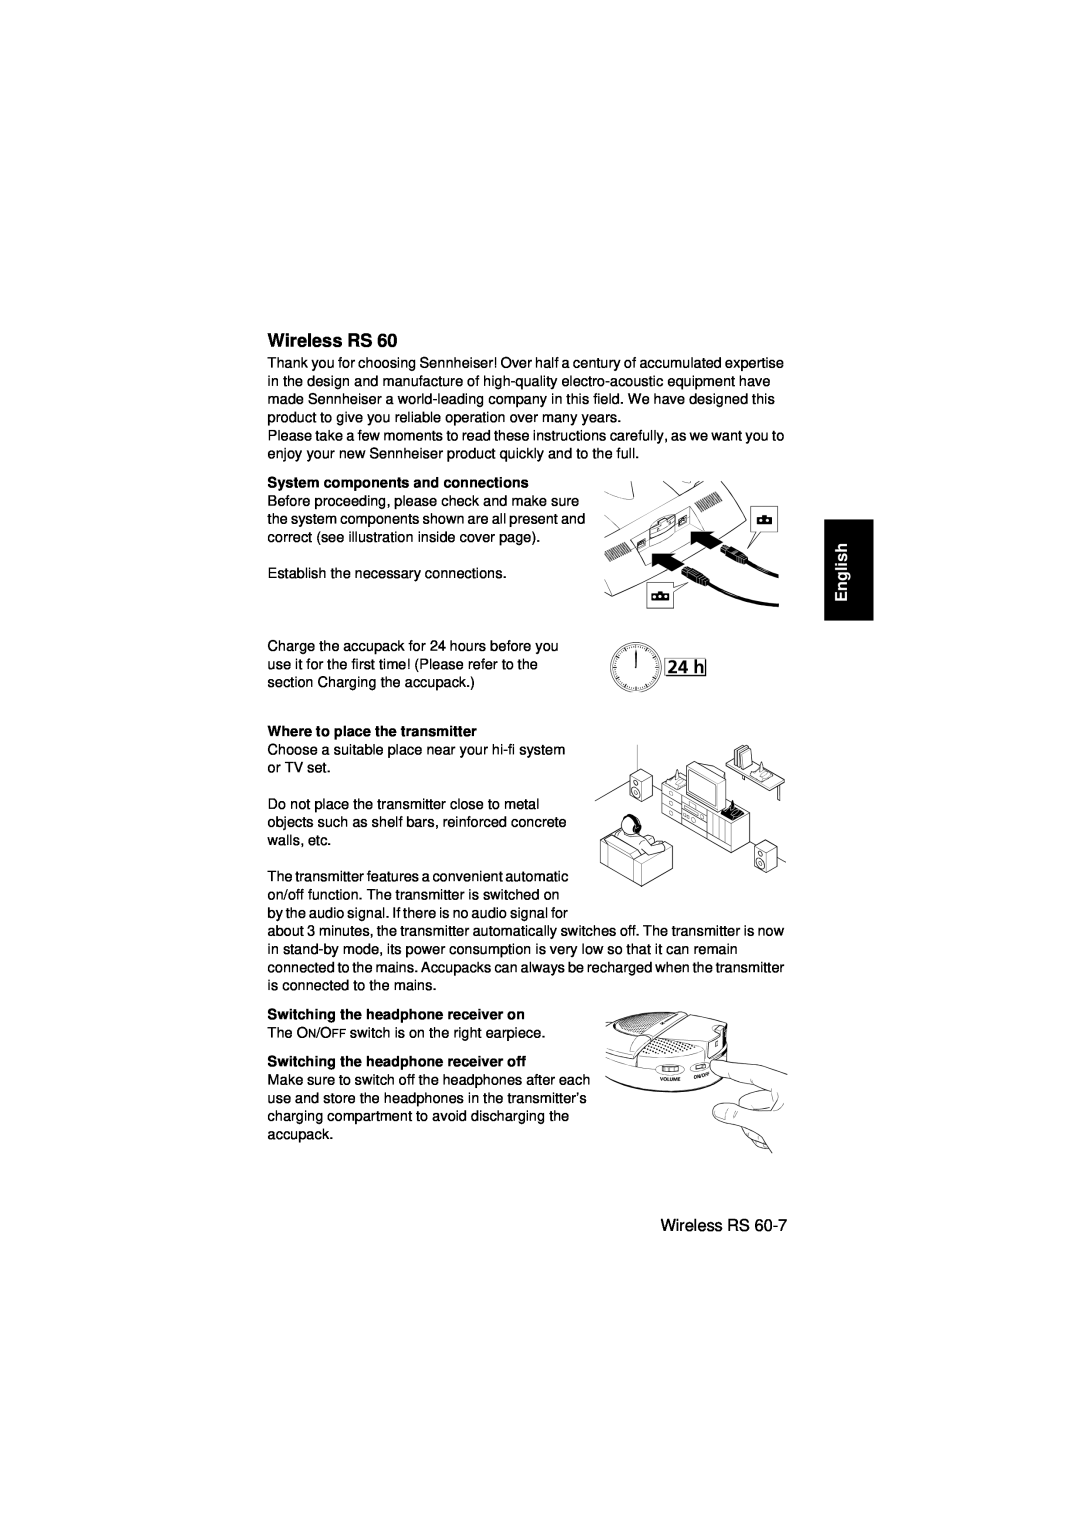 Sennheiser Wireless RS 60 instruction manual English, System components and connections, Where to place the transmitter 